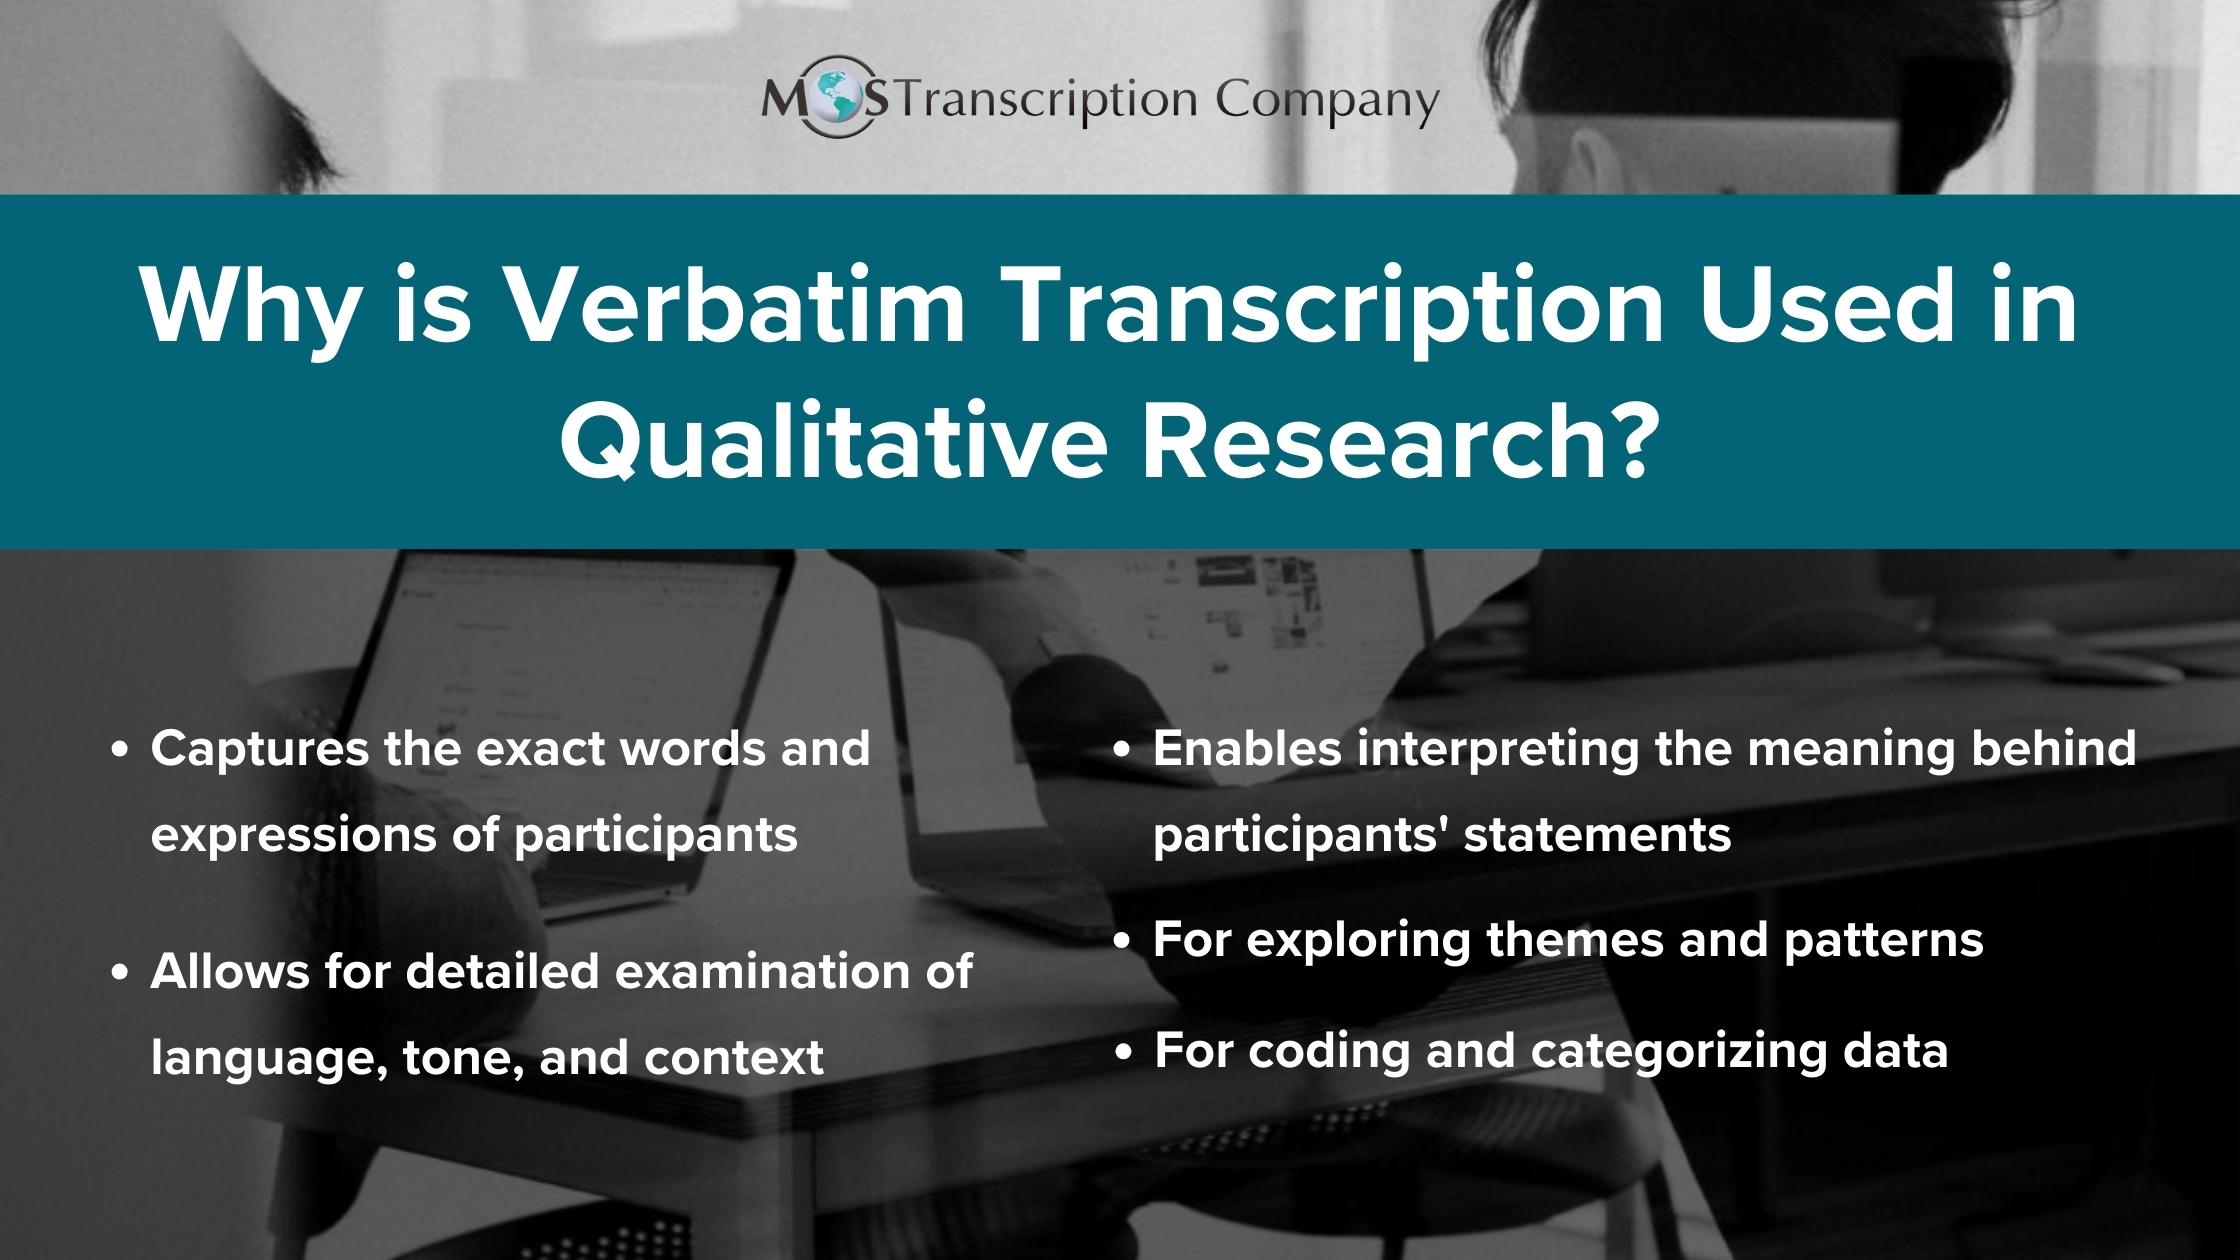 Why is Verbatim Transcription Used in Qualitative Research